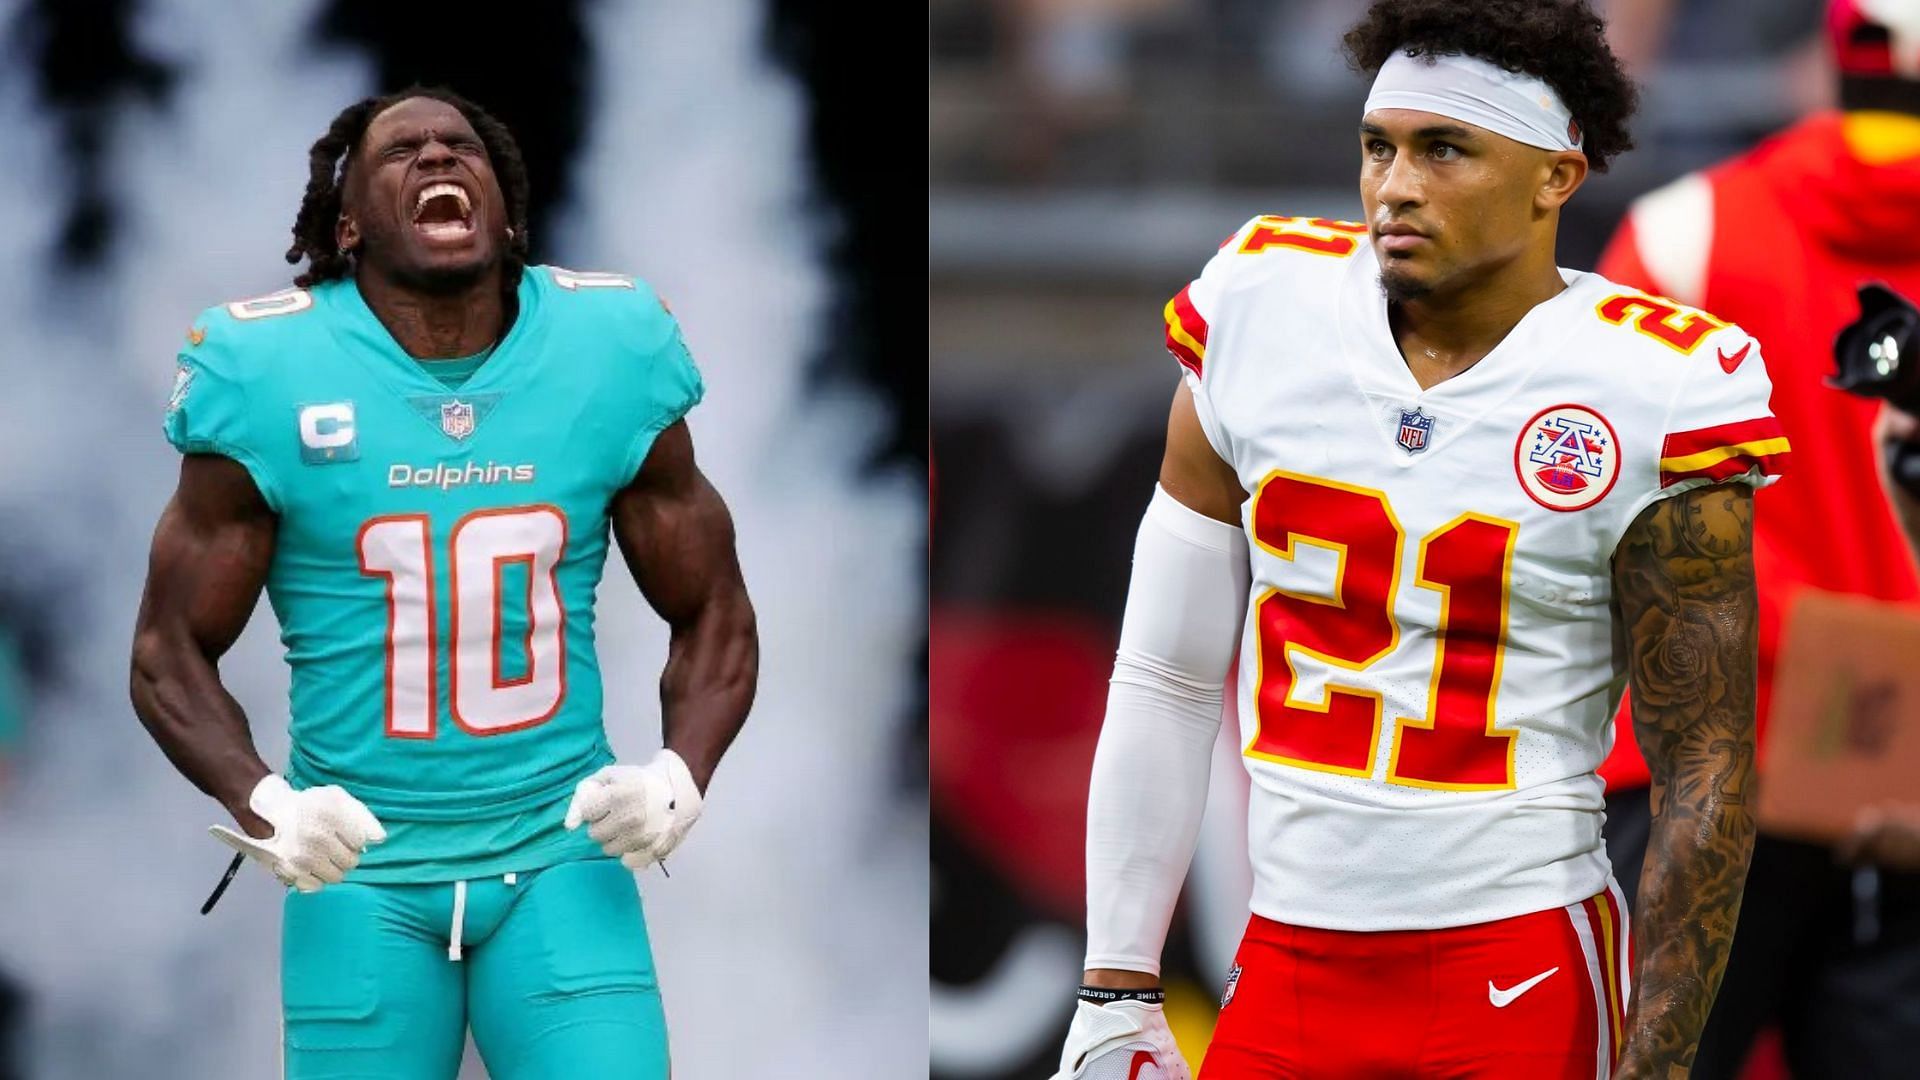 NFL fans label Dolphins as ‘frauds’ after Tyreek Hill’s mistake results ...